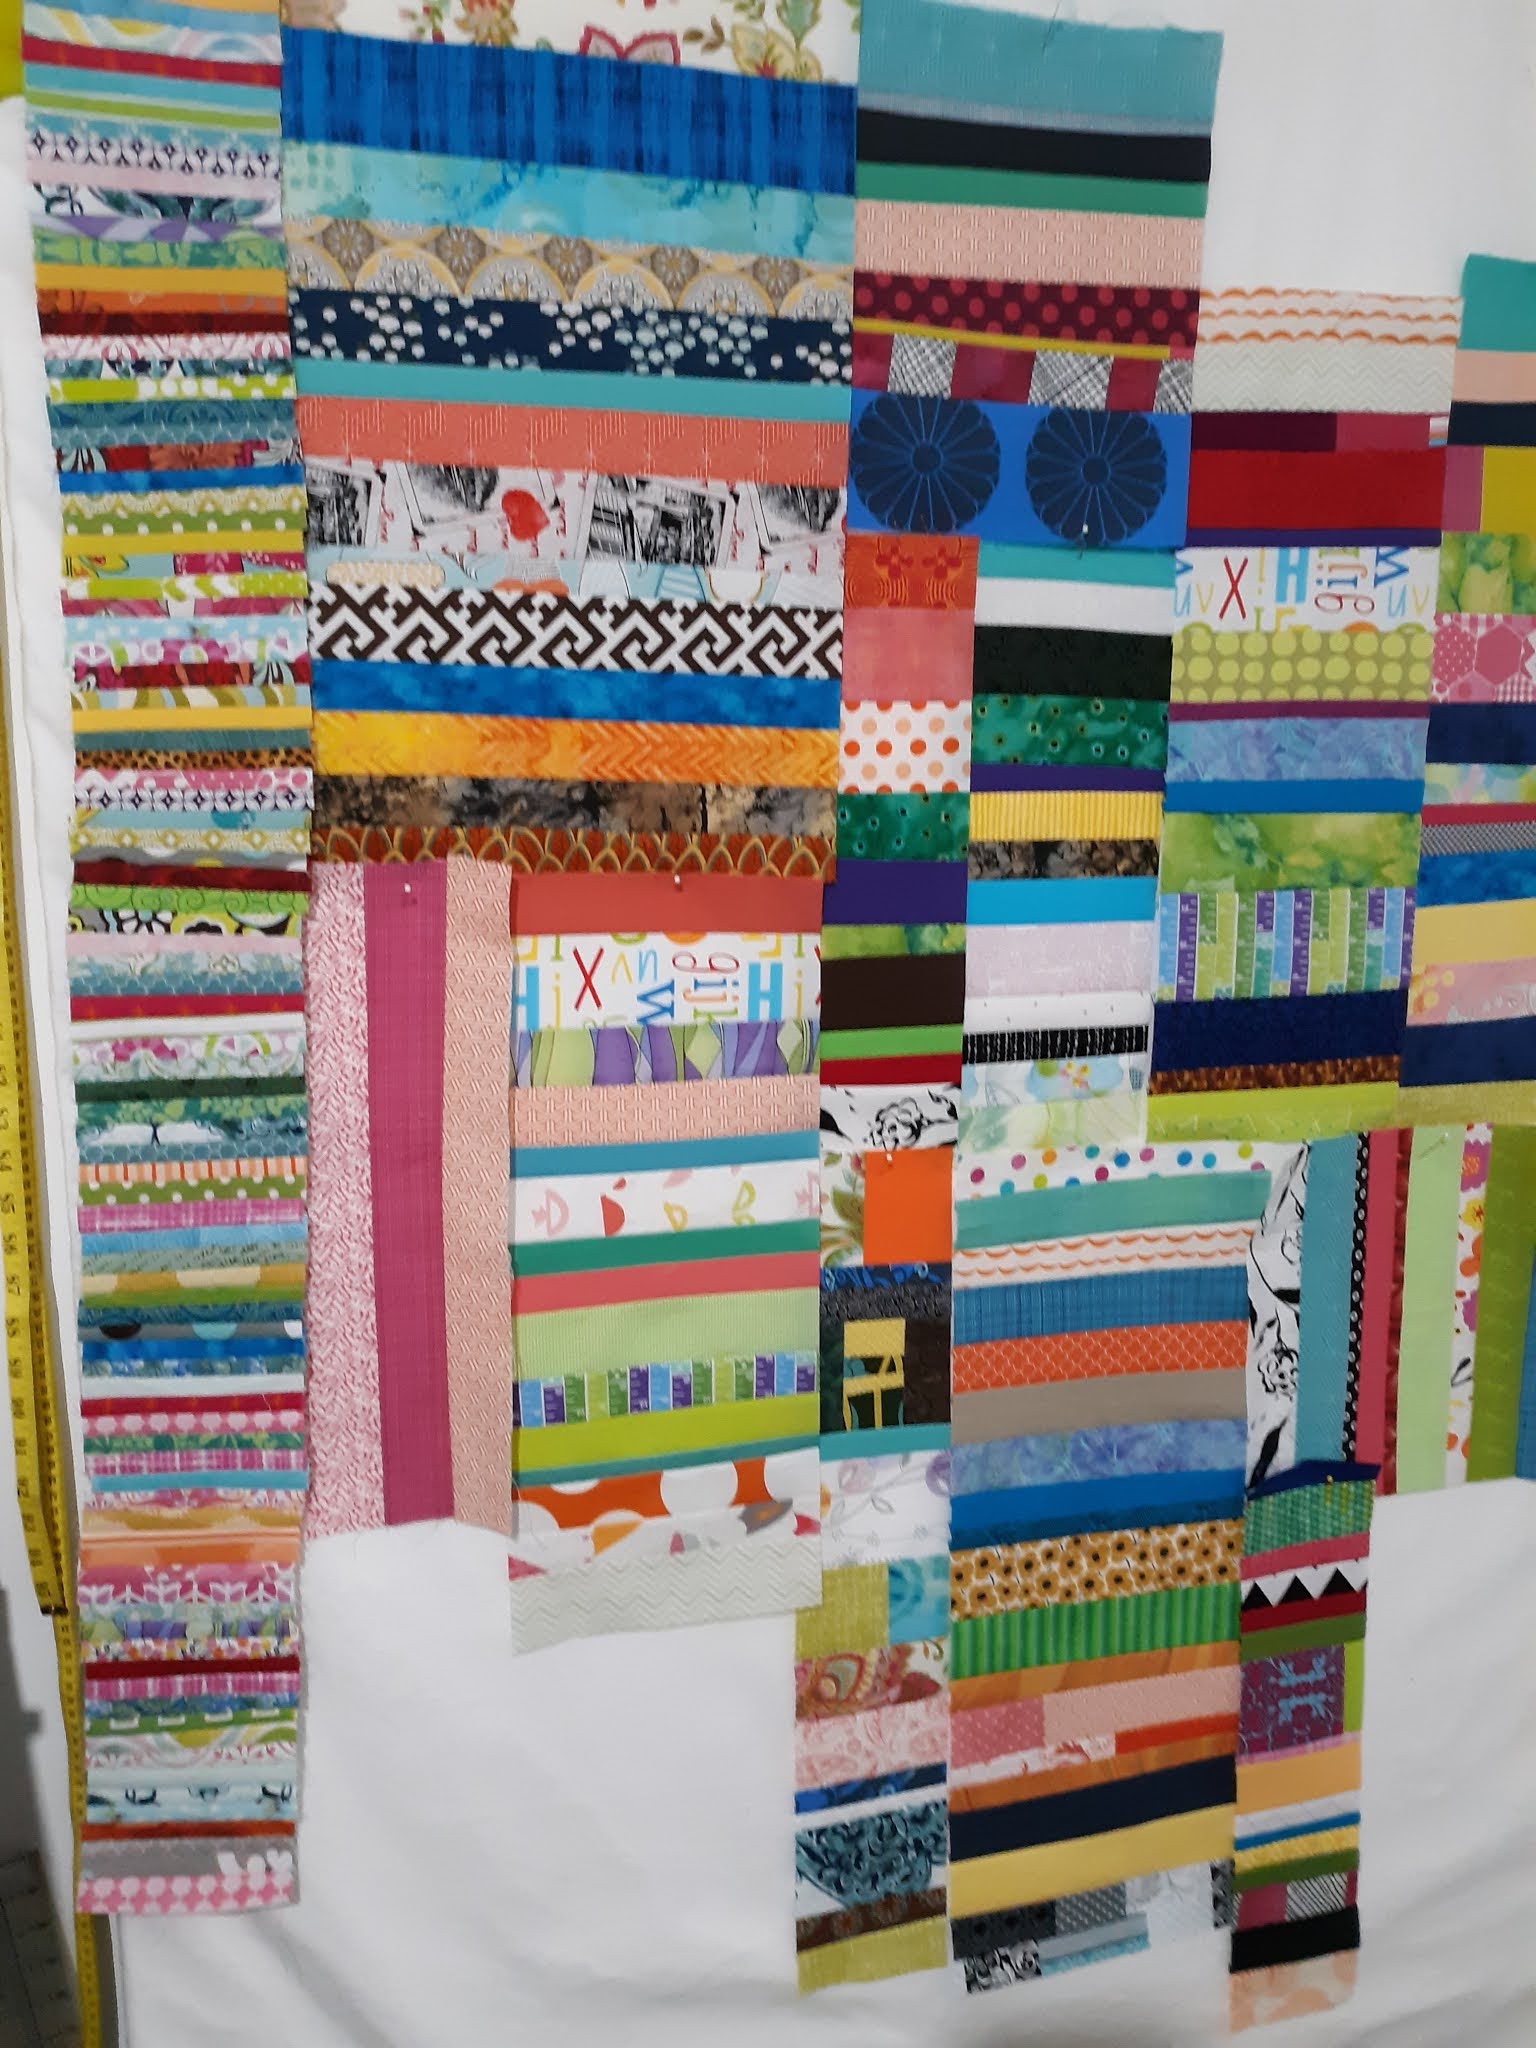 Kelly Quilts with AccuQuilt: Fall for These Easy Tumbler Blocks